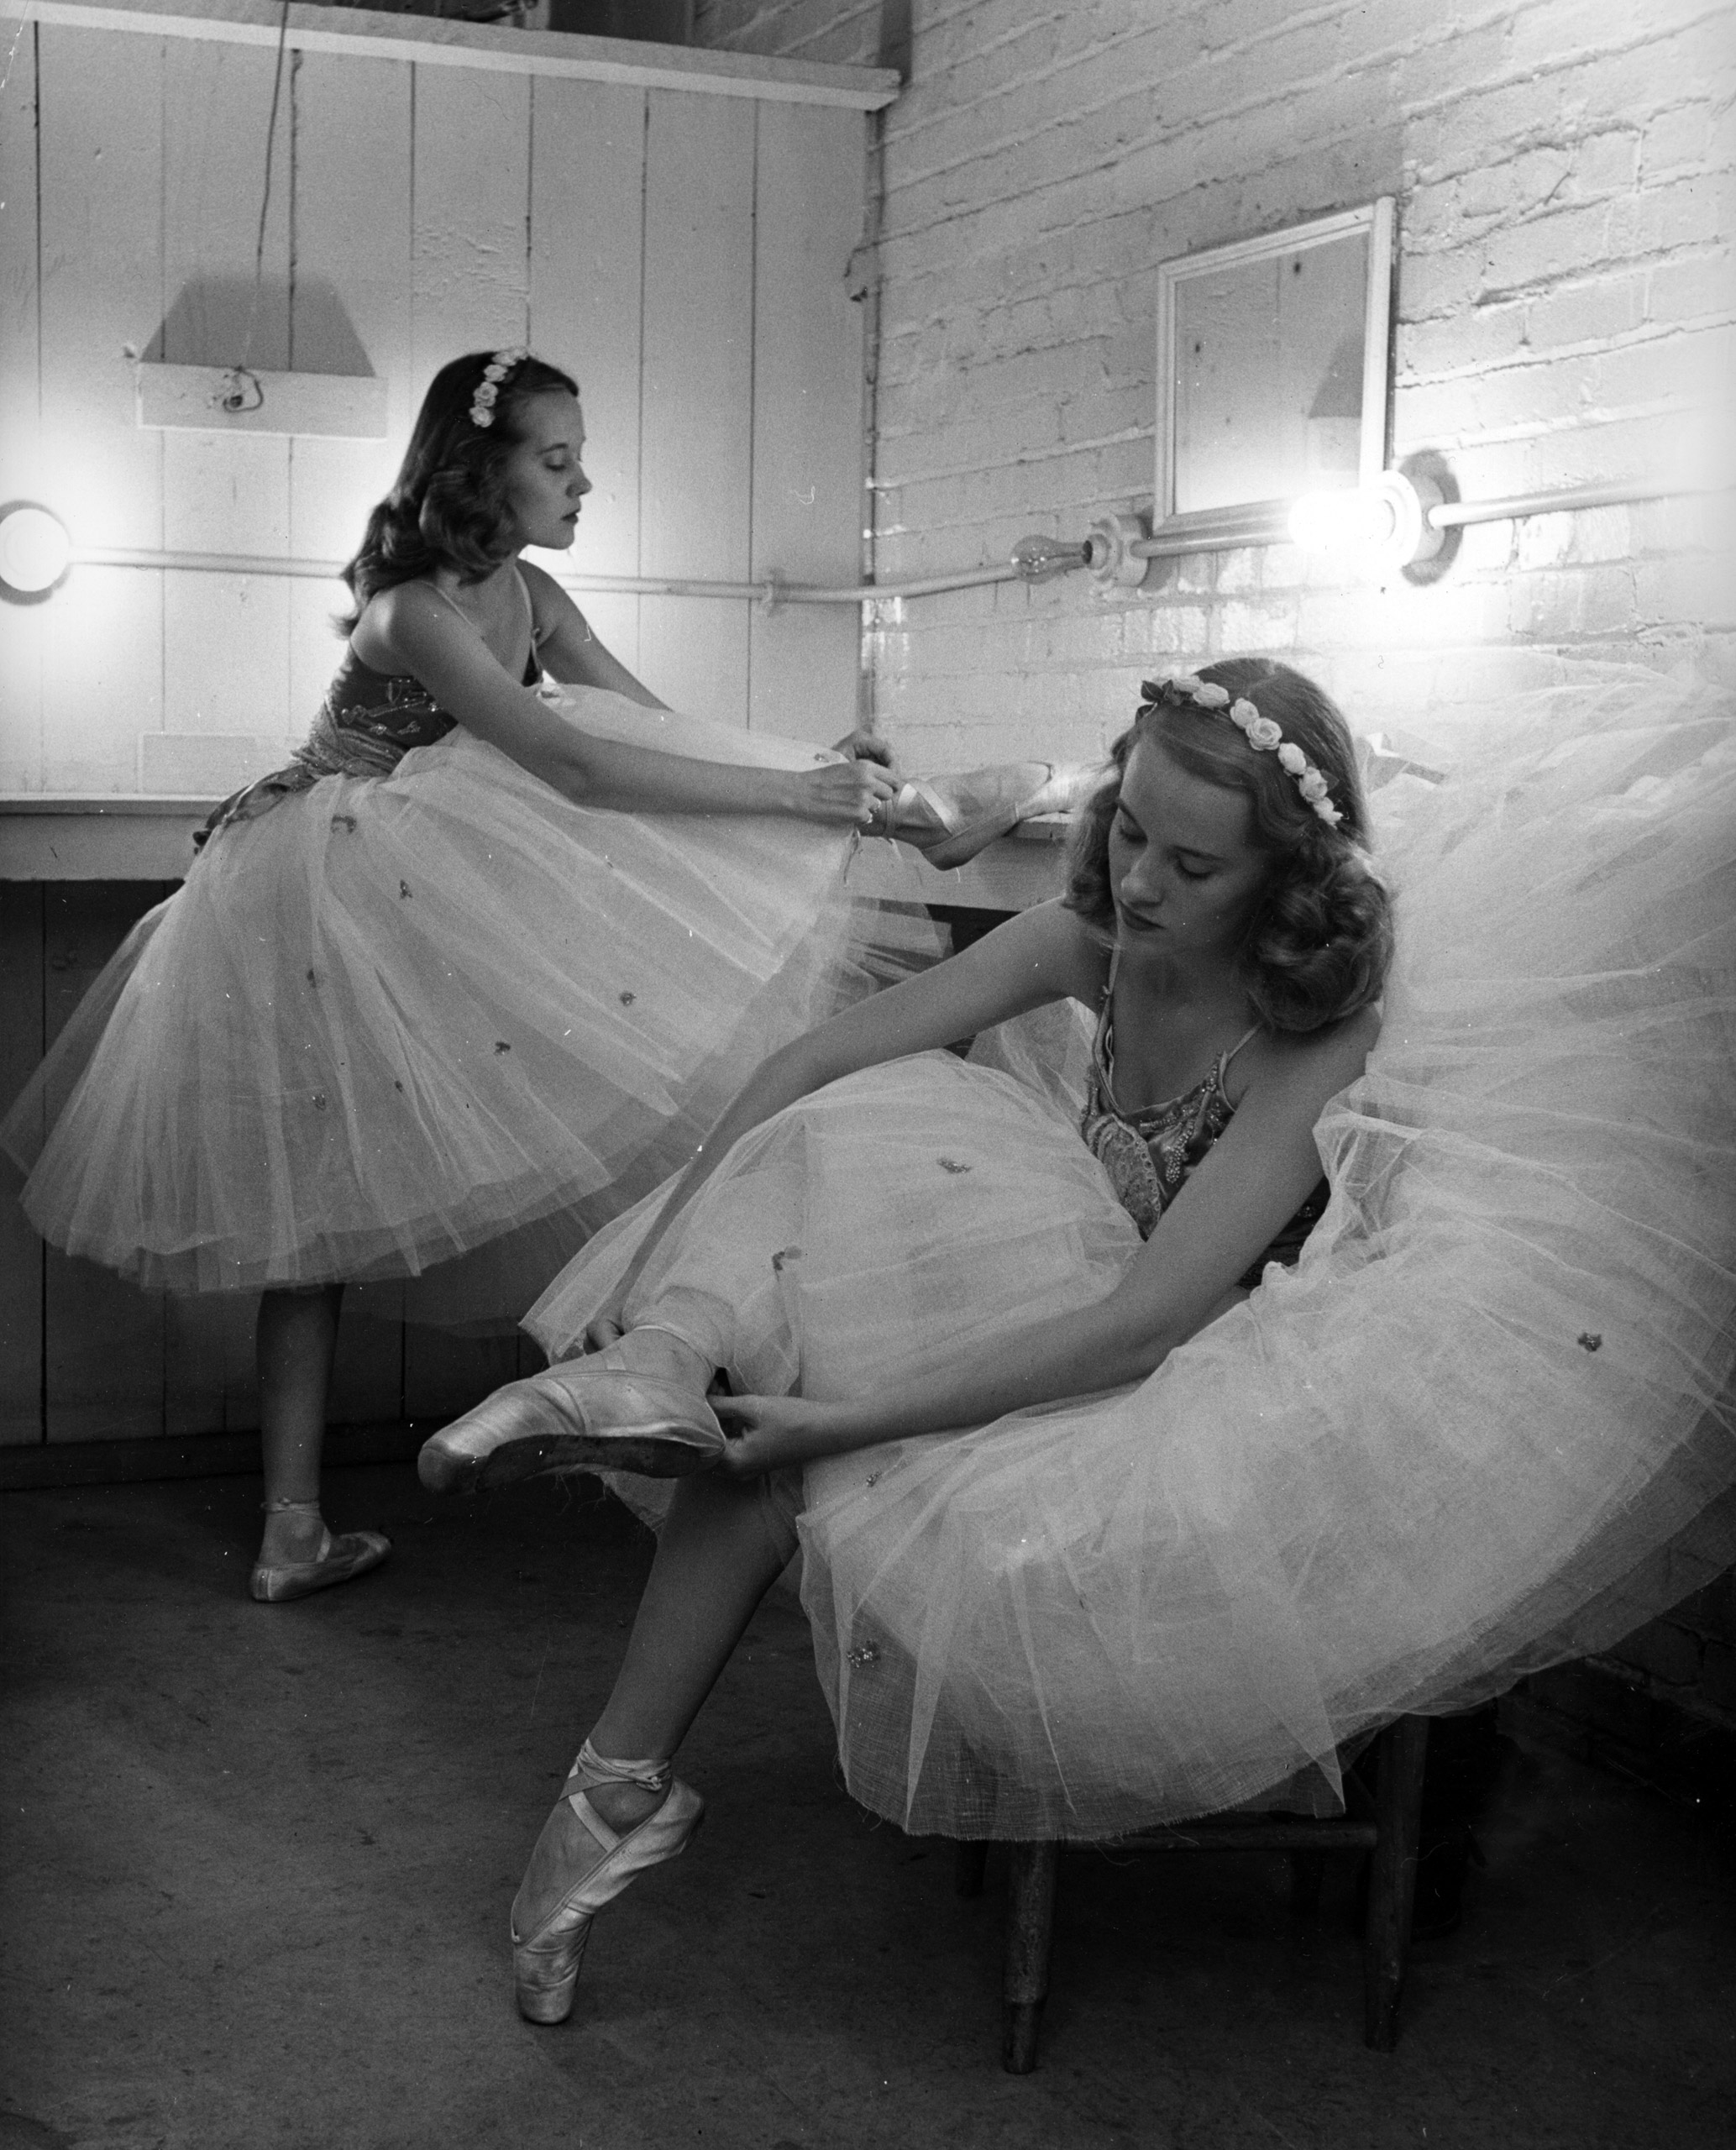 Identical twins, Barbara and Betty Bounds at Ballet class.